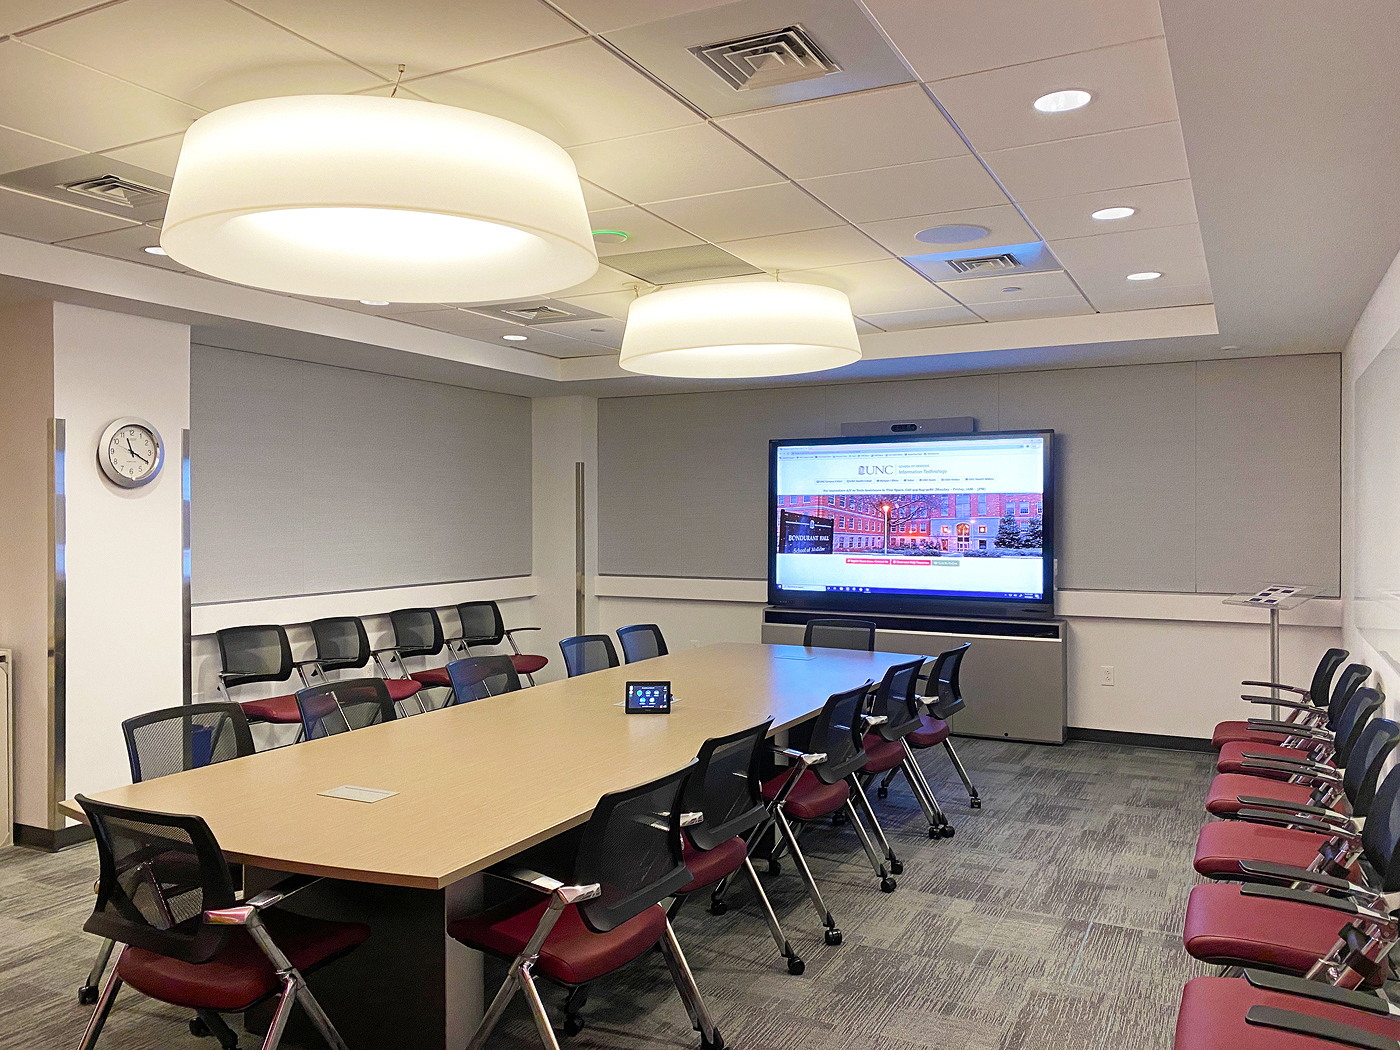 Two new conference rooms connect to the Education Center via NAV AVoIP, providing additional gathering spaces for collaboration. Photo courtesy of Heidi Grassley, ClarkPowell.